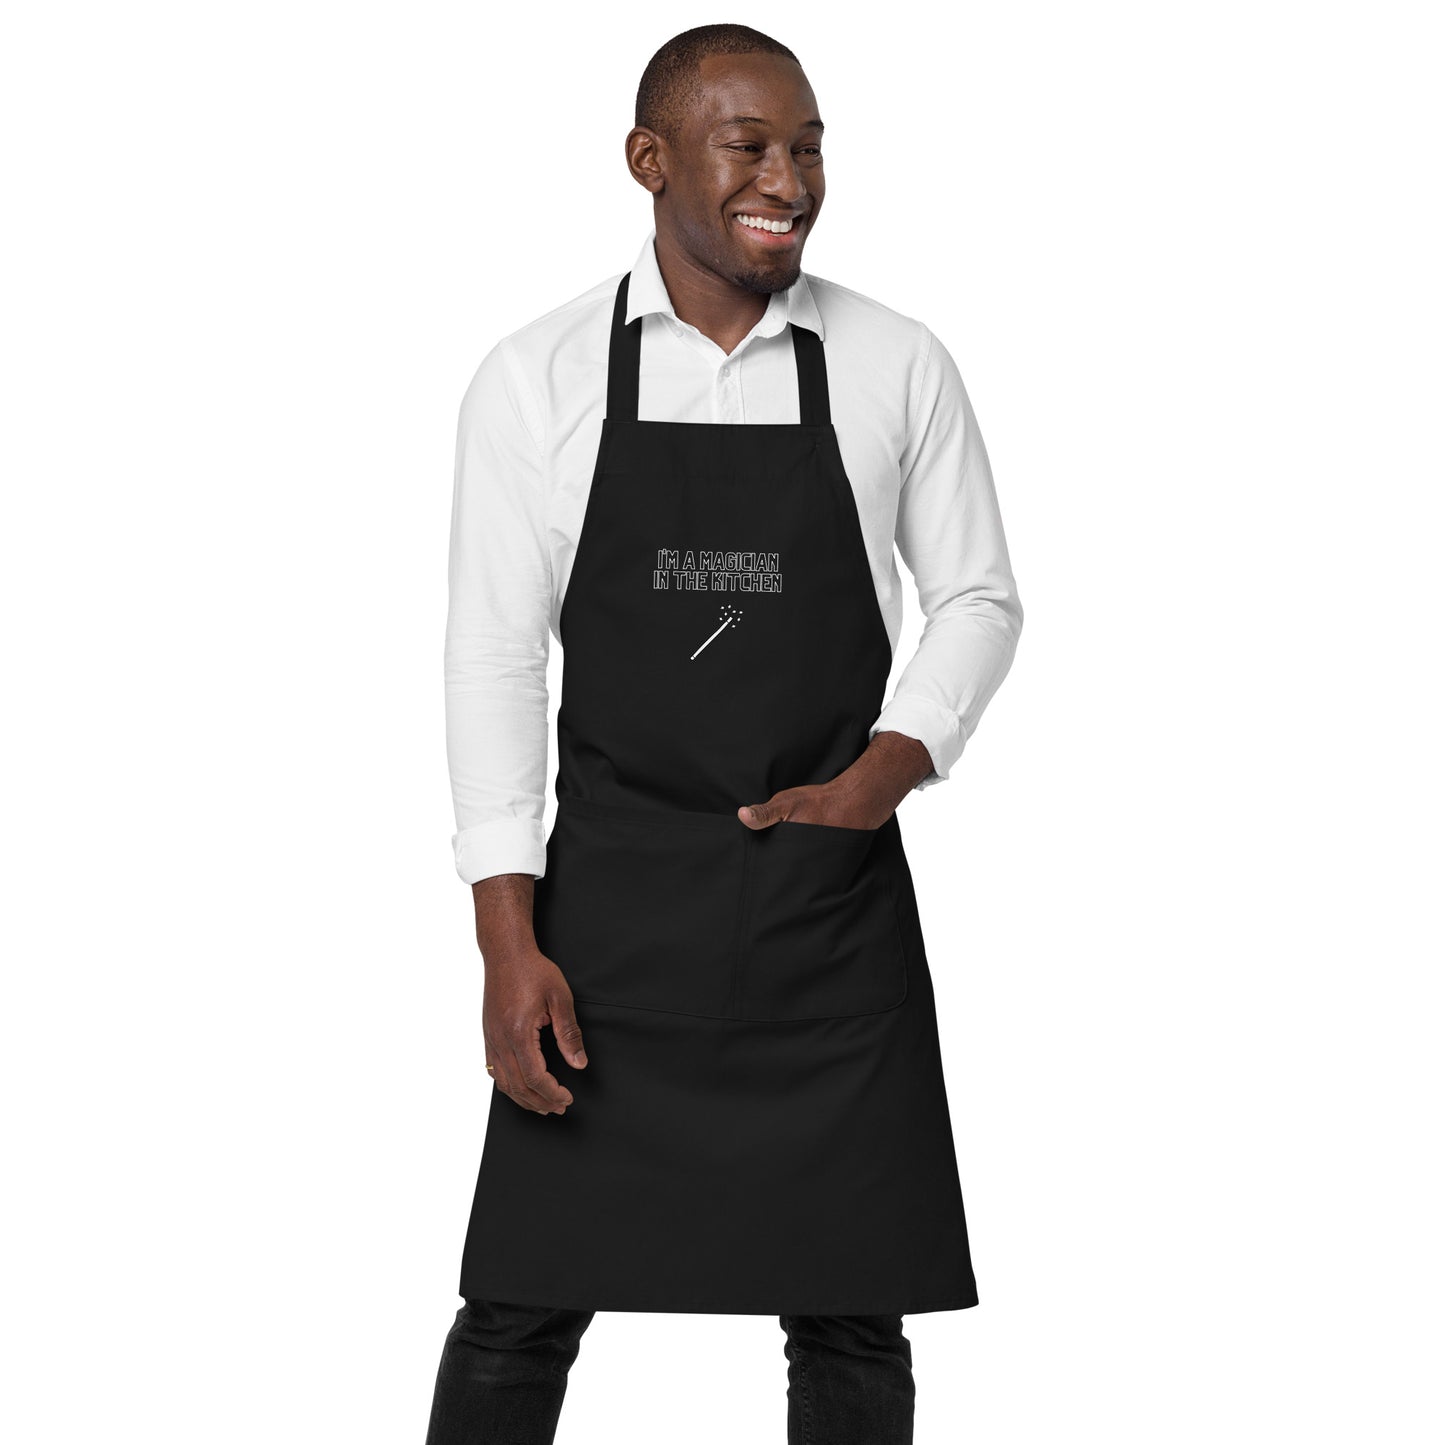 Magician In The Kitchen Organic Cotton Apron